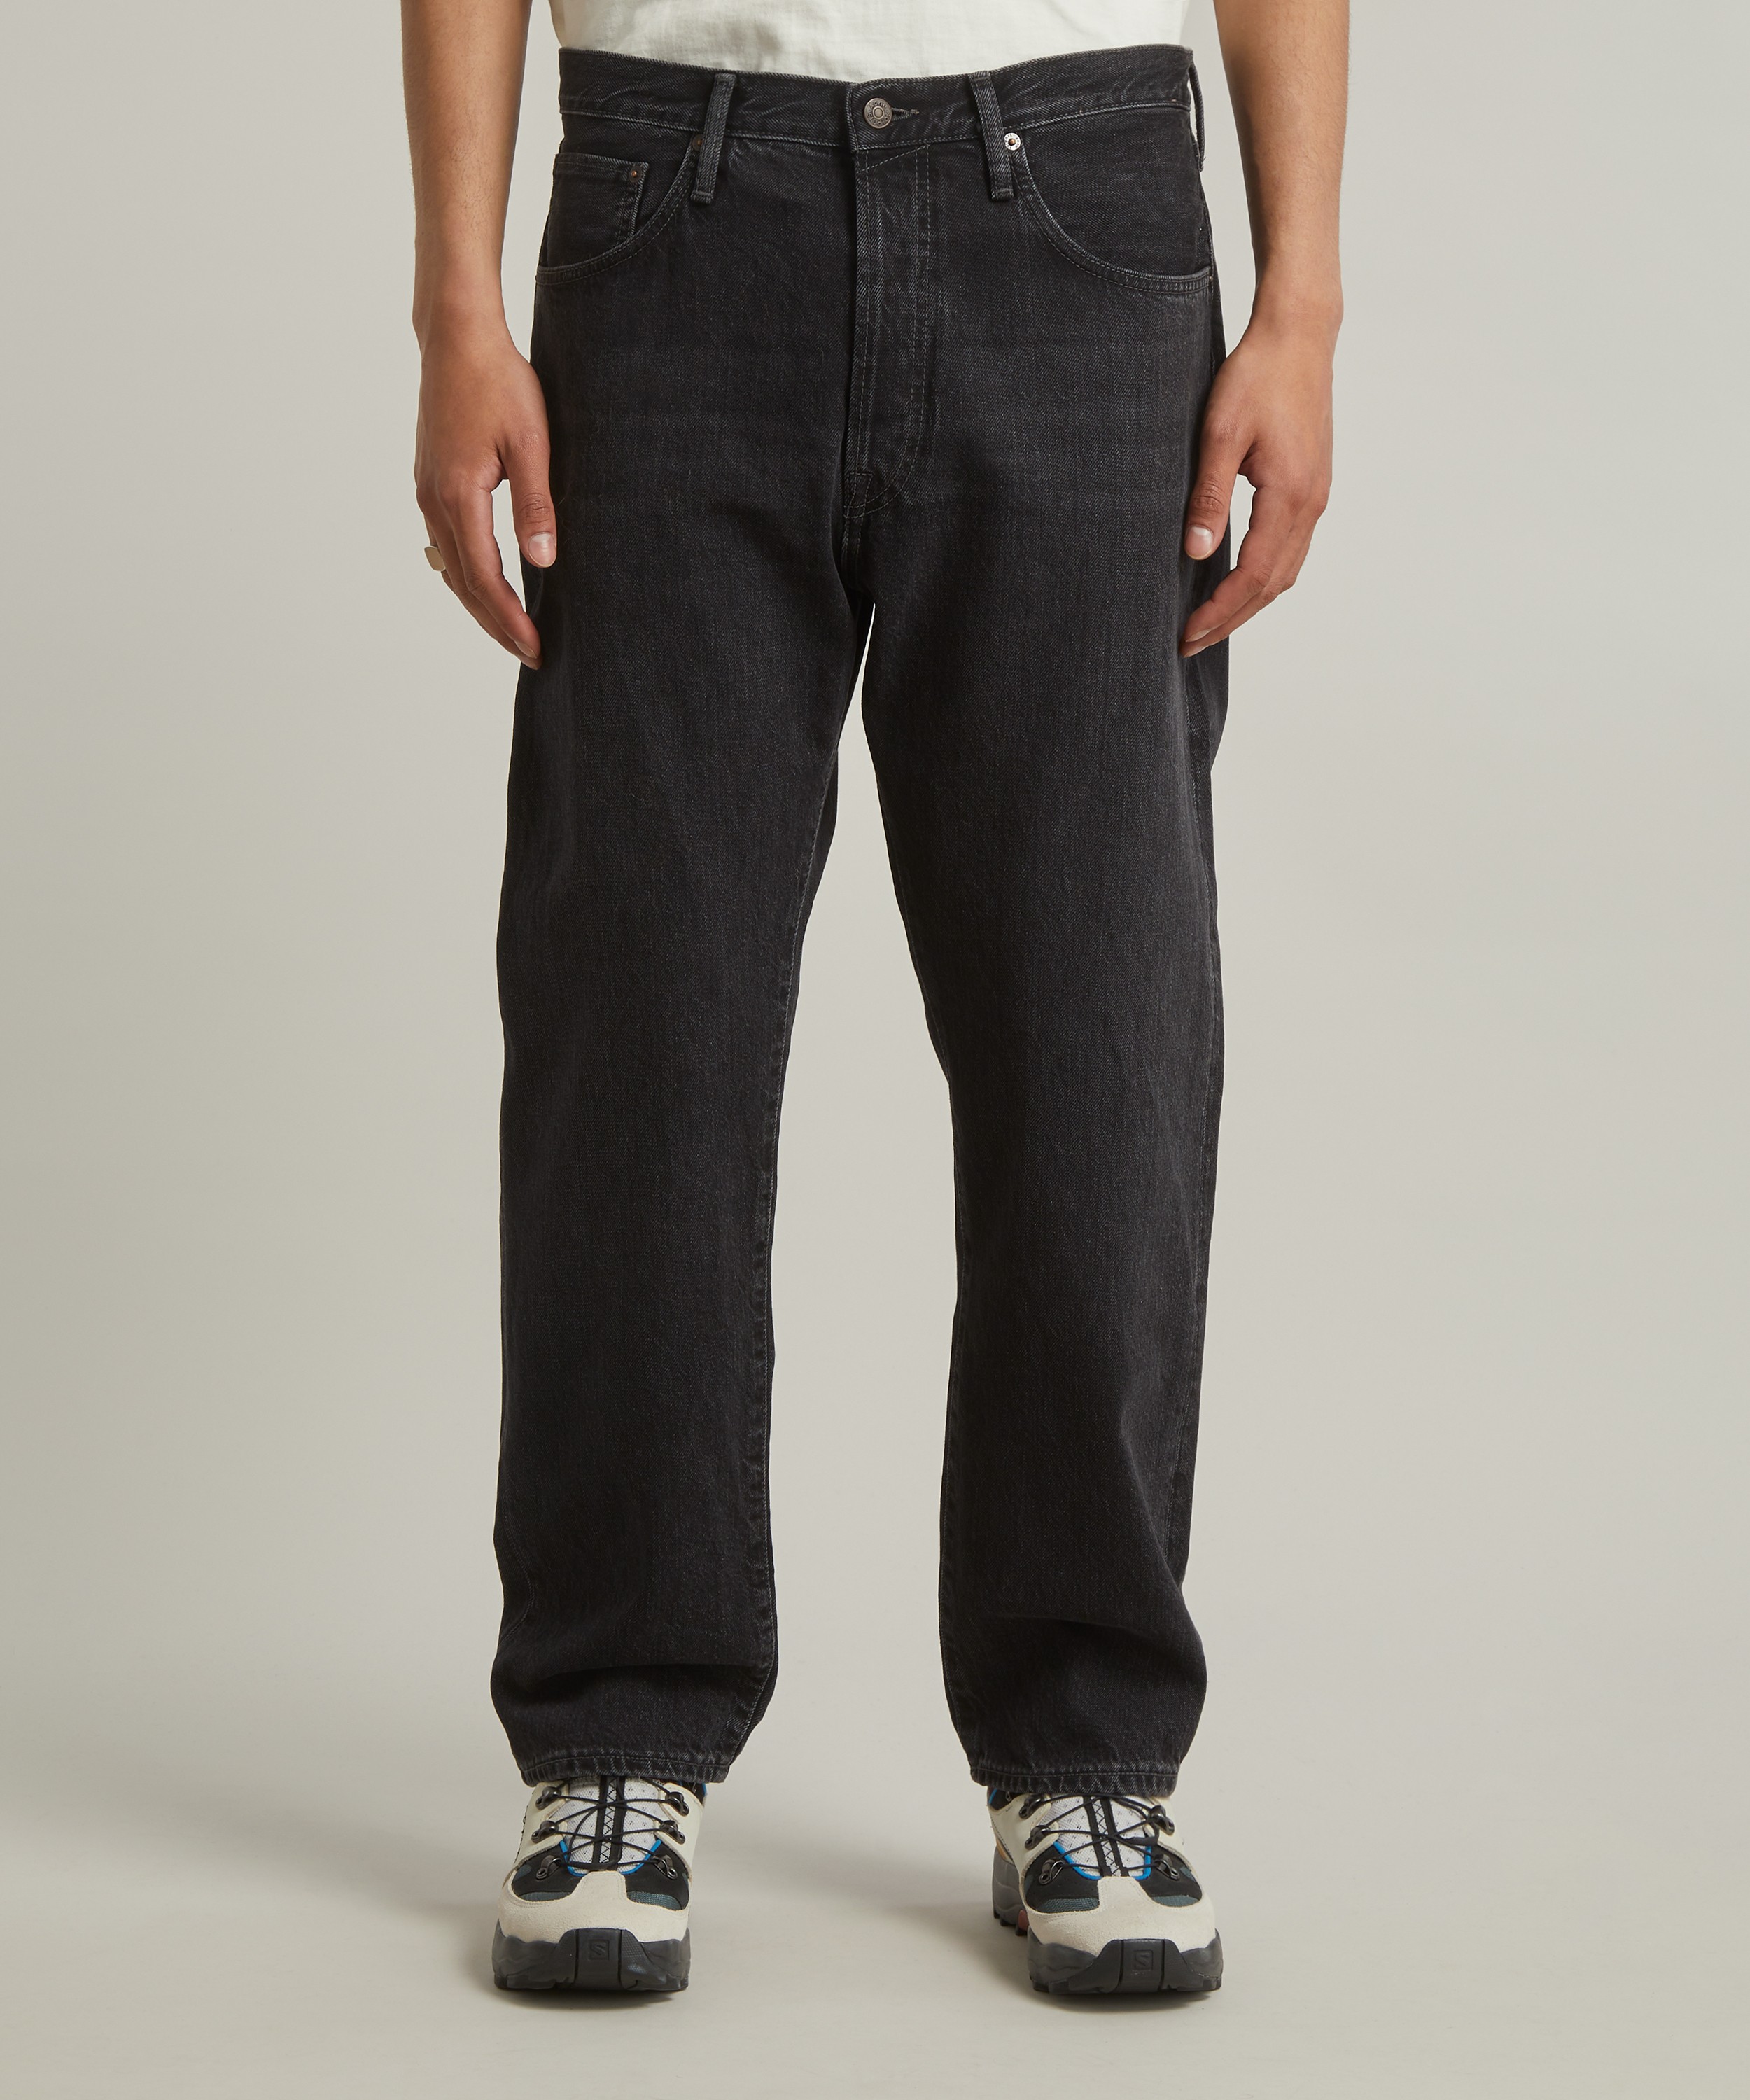 Acne Studios - 2003 Relaxed Fit Jeans image number 2